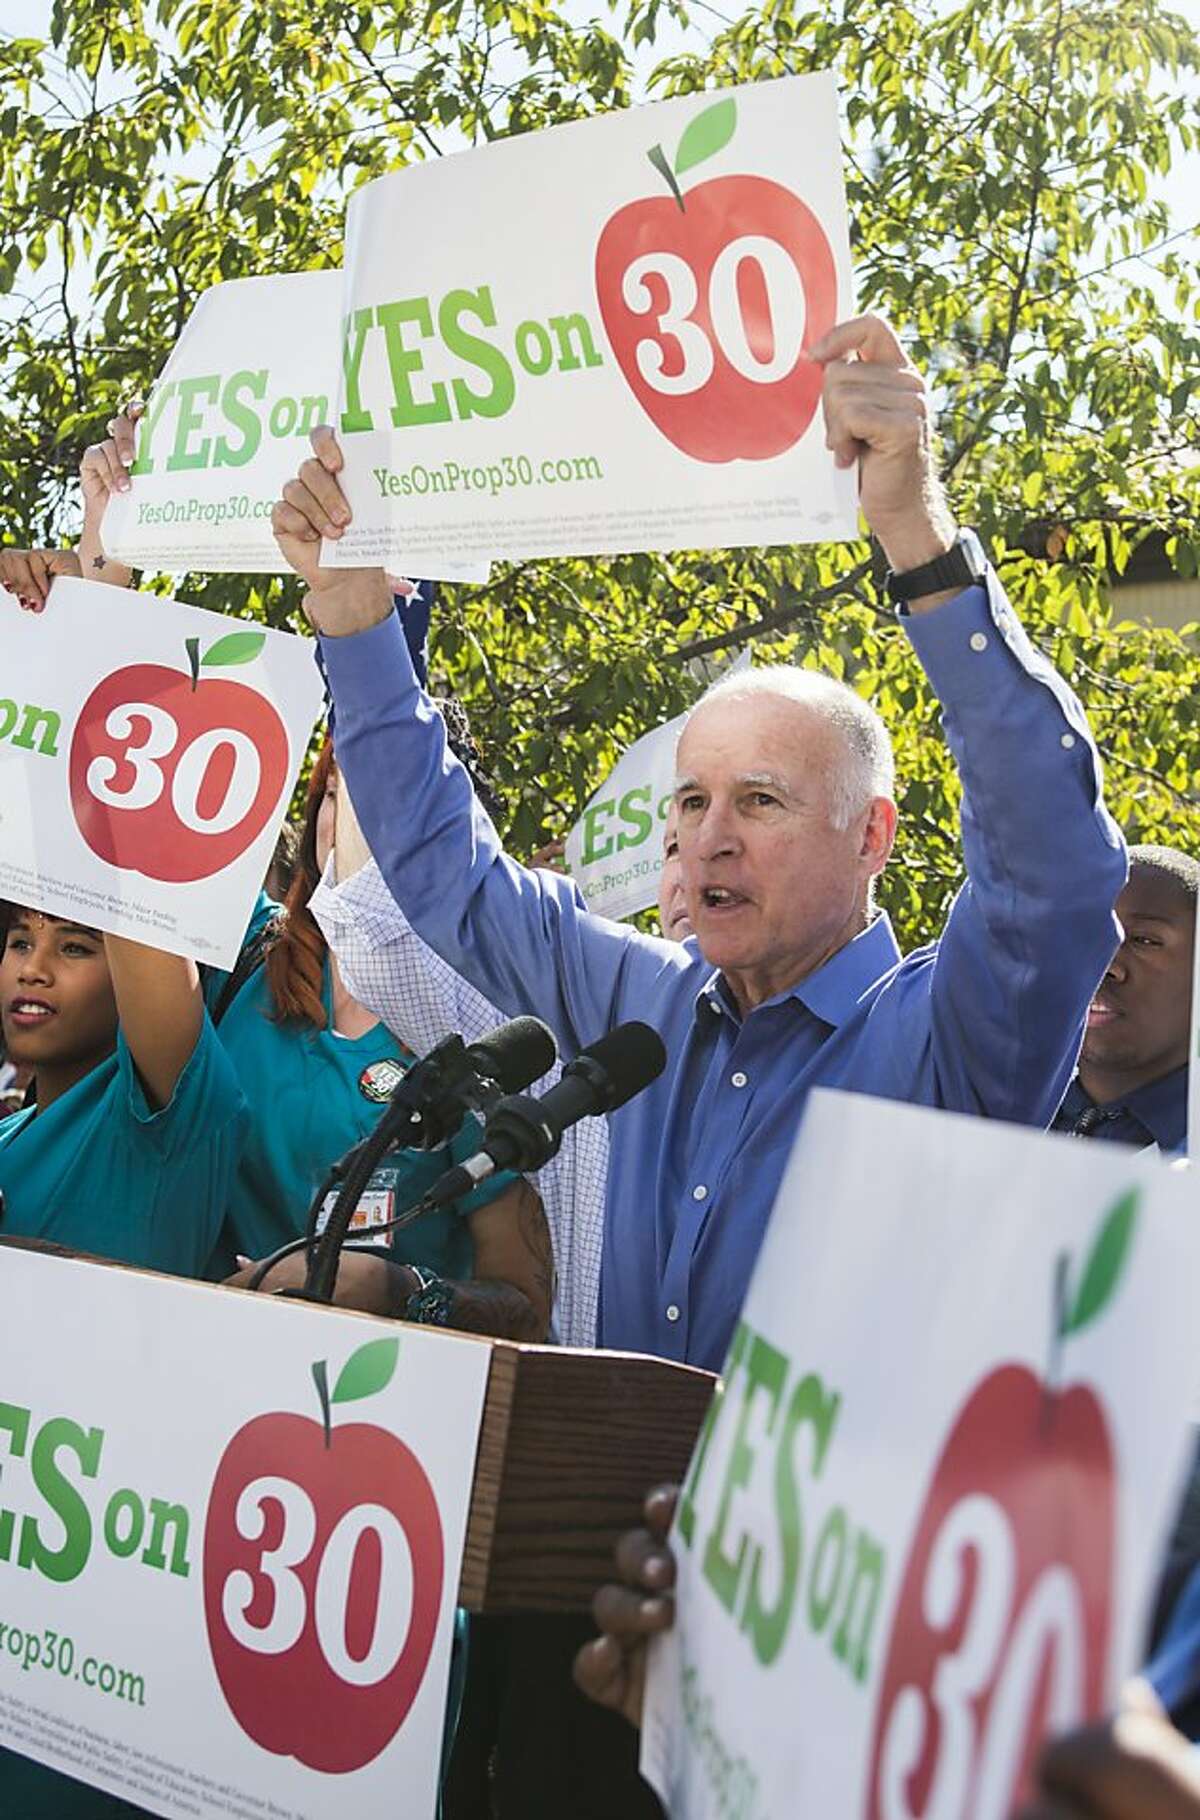 California Gov. Jerry Brown encourages students to vote for Prop 30 at a rally for his tax-raising Proposition 30, Sacramento City College, in Sacramento California, on Thursday October 18th 2012.